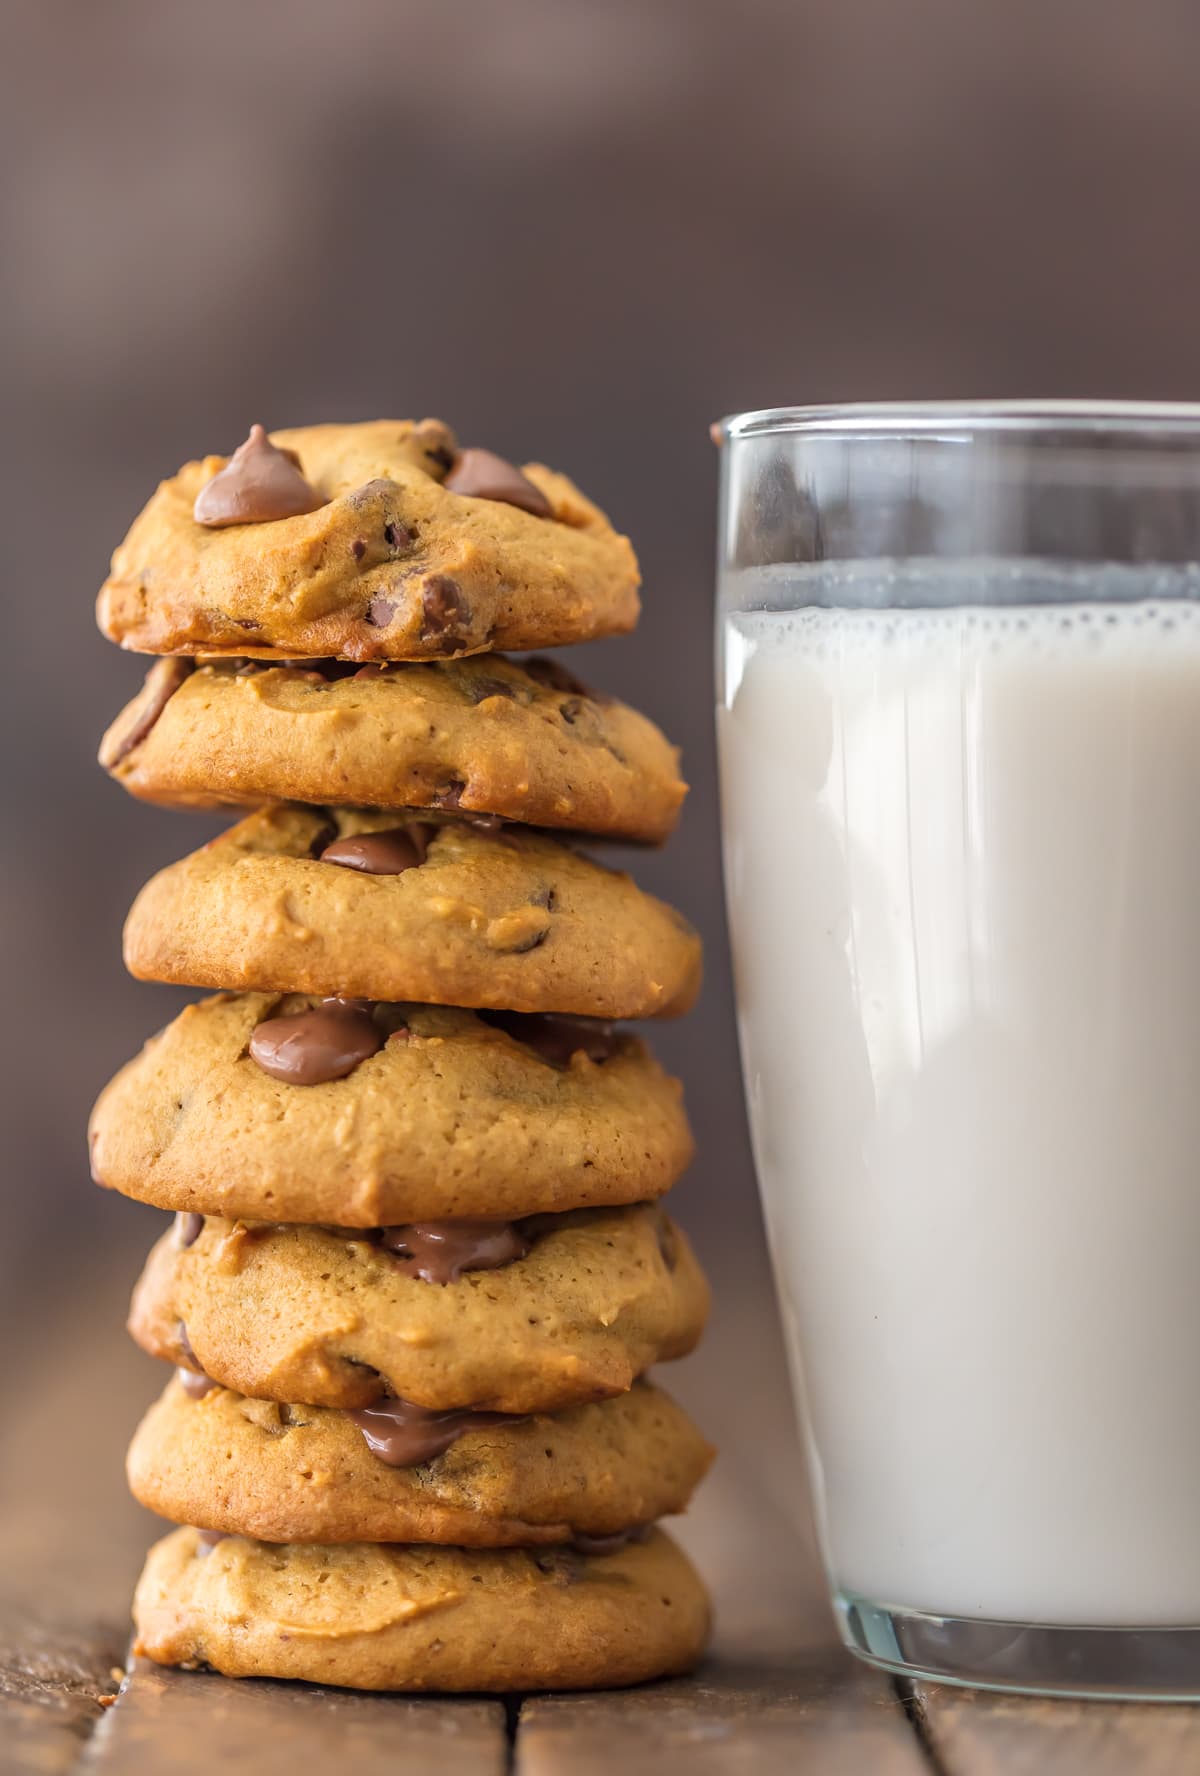 A stack of applesauce chocolate chip cookies next to a glass of milk